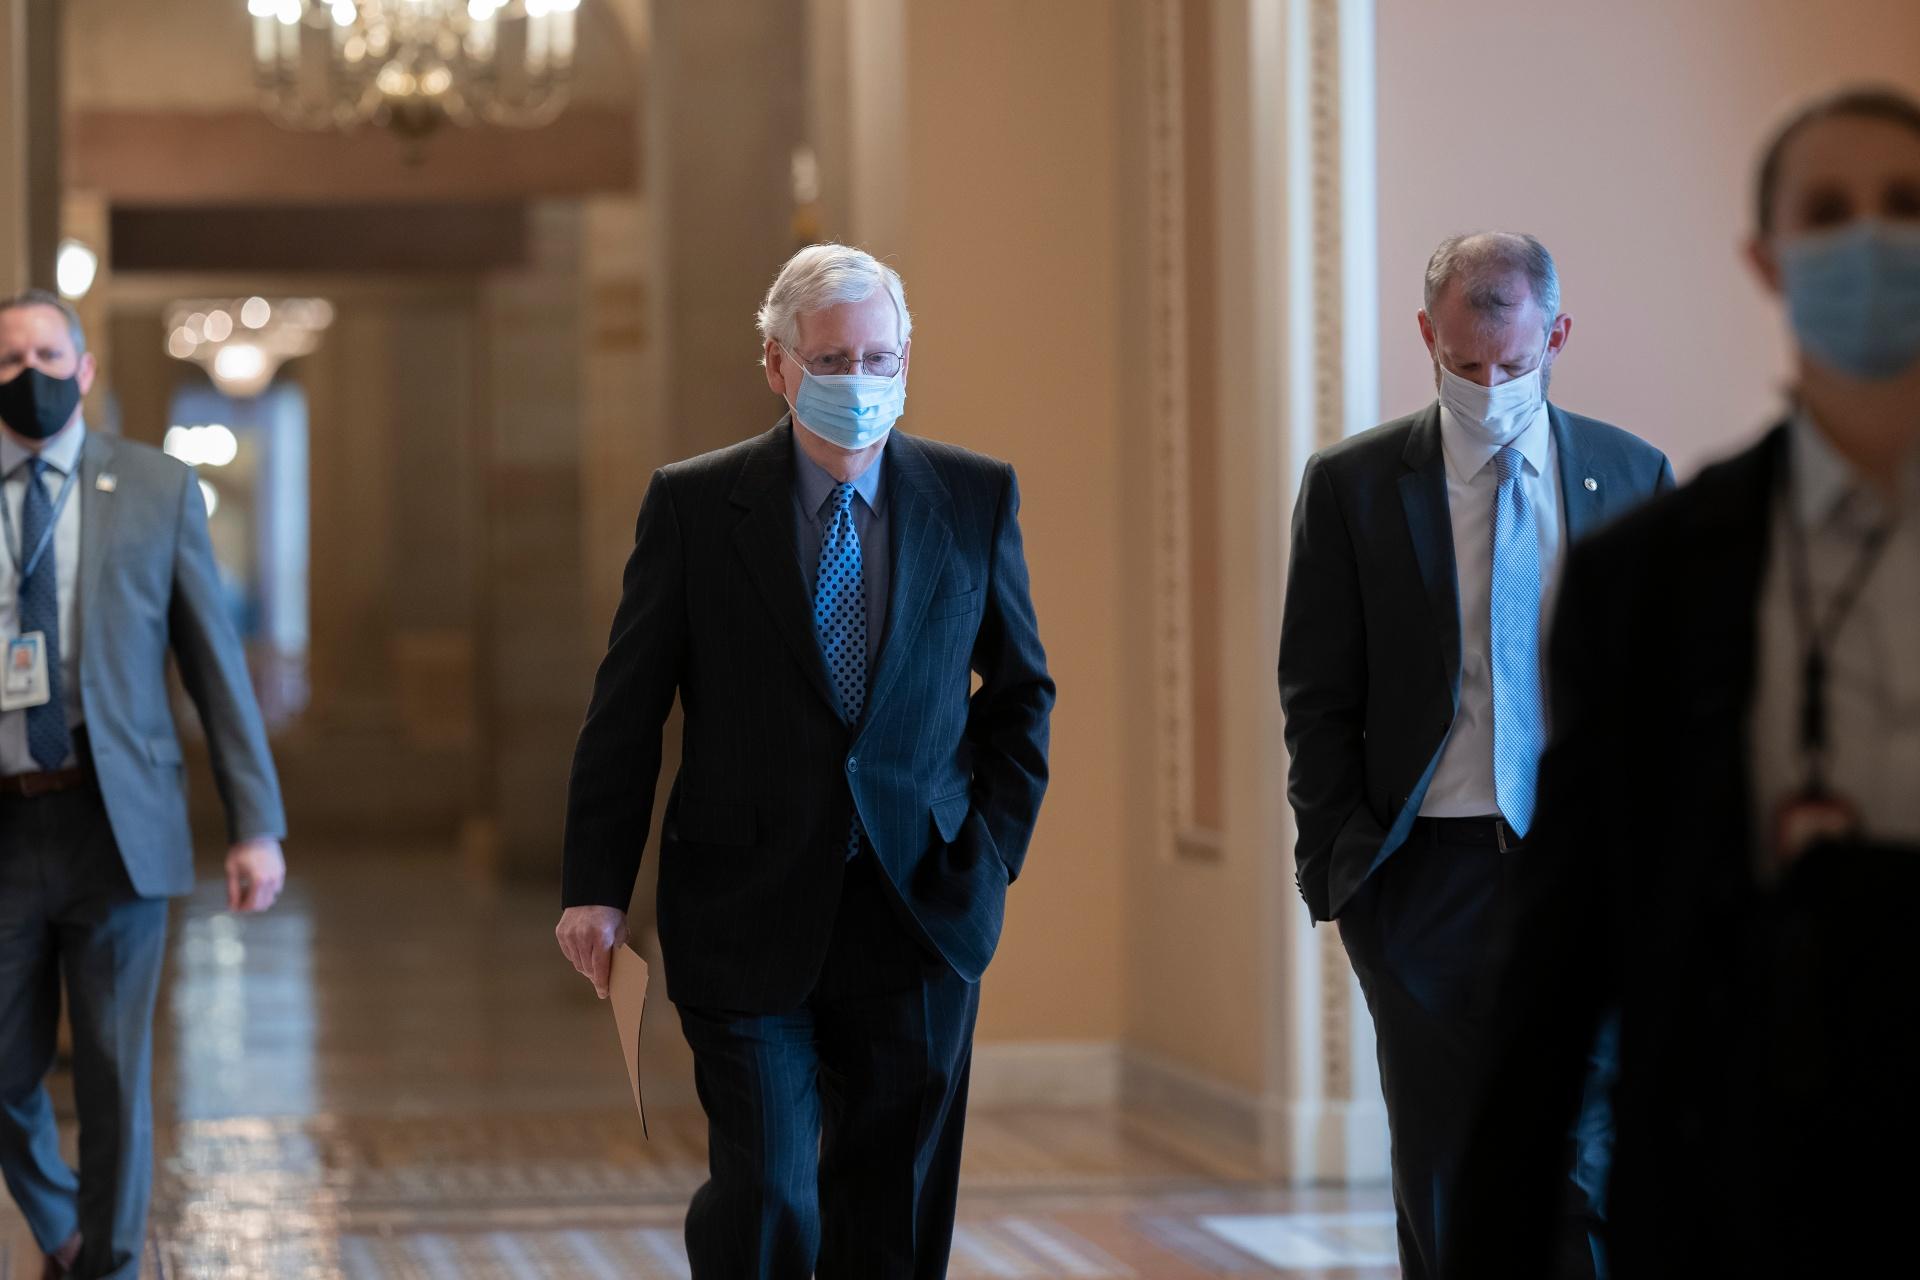 On the first full day of the new Democratic majority in the Senate, Sen. Mitch McConnell, R-Ky., the top Republican, walks to the chamber for the start of business as the minority leader, at the Capitol in Washington, Thursday, Jan. 21, 2021. (AP Photo / J. Scott Applewhite)